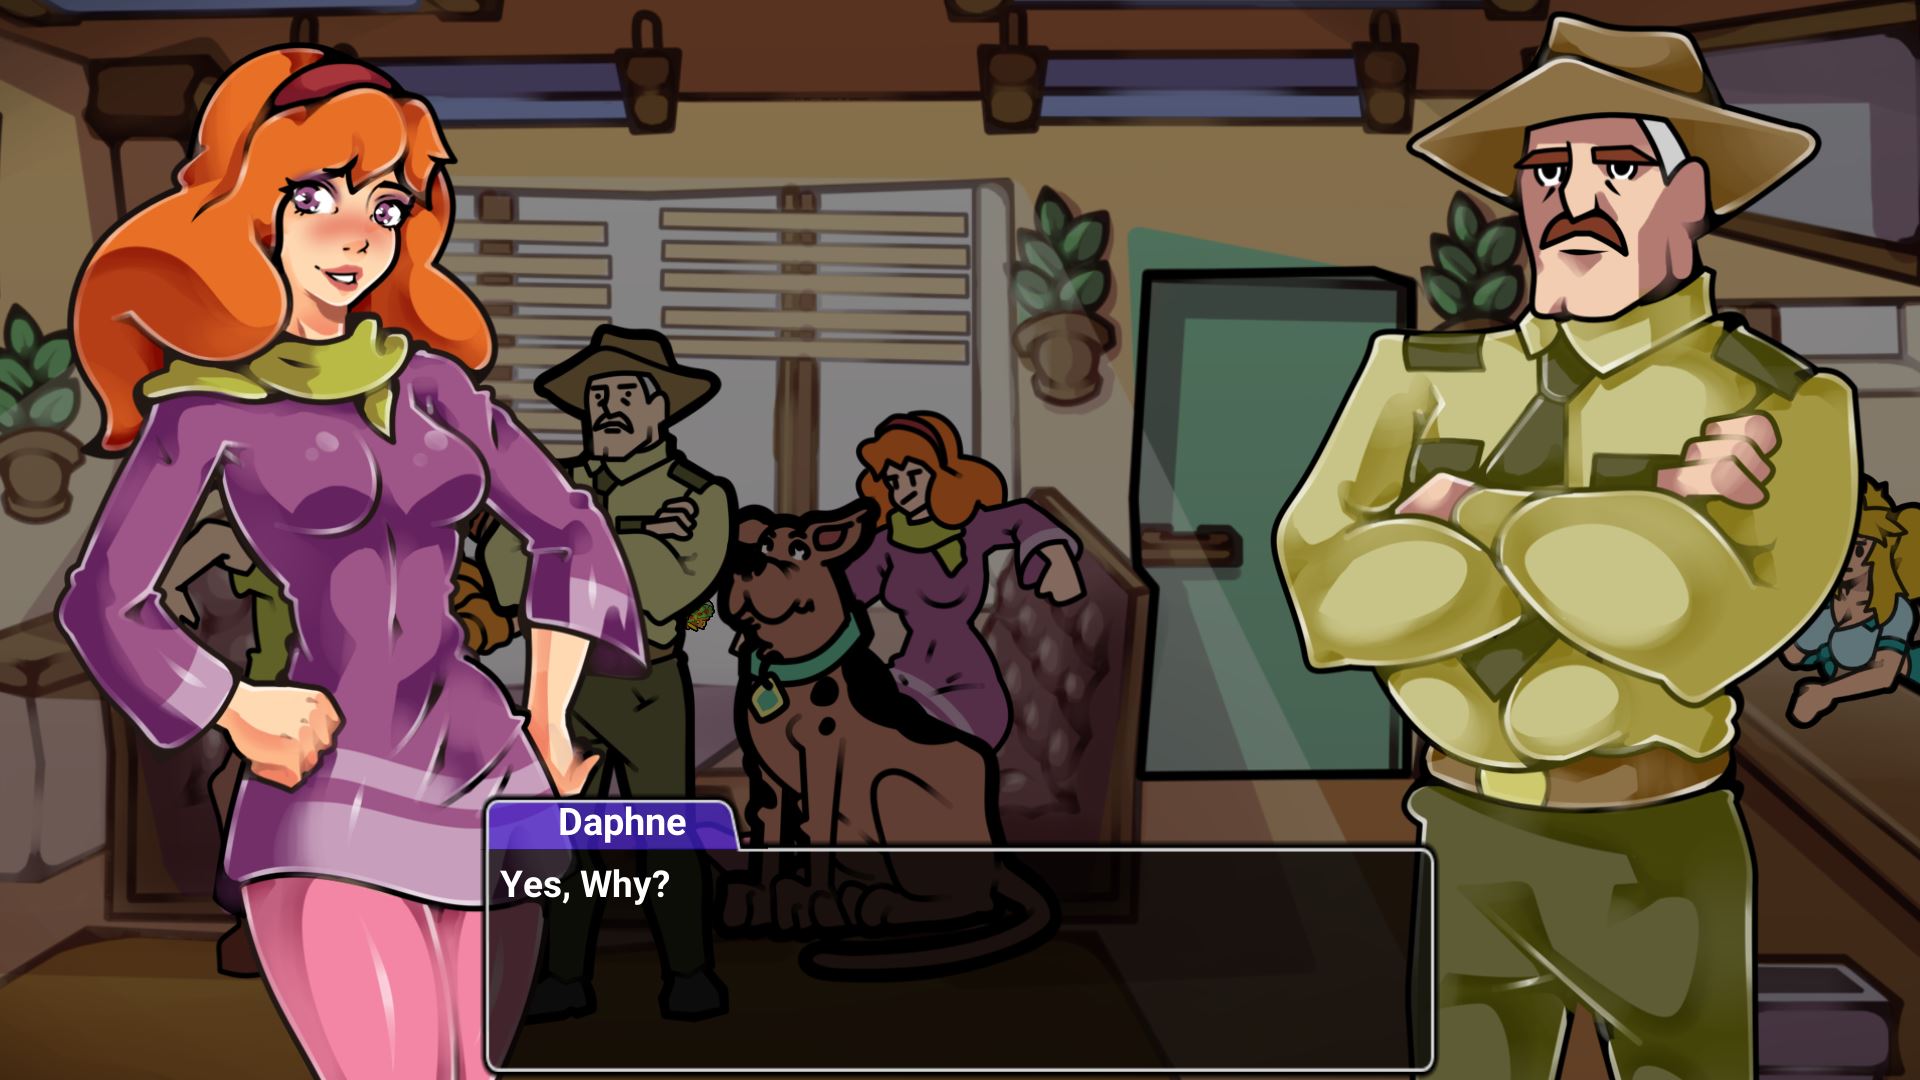 Unity] Scooby-Doo! A Depraved Investigation - v2 by The Dark Forest 18+ Adult  xxx Porn Game Download